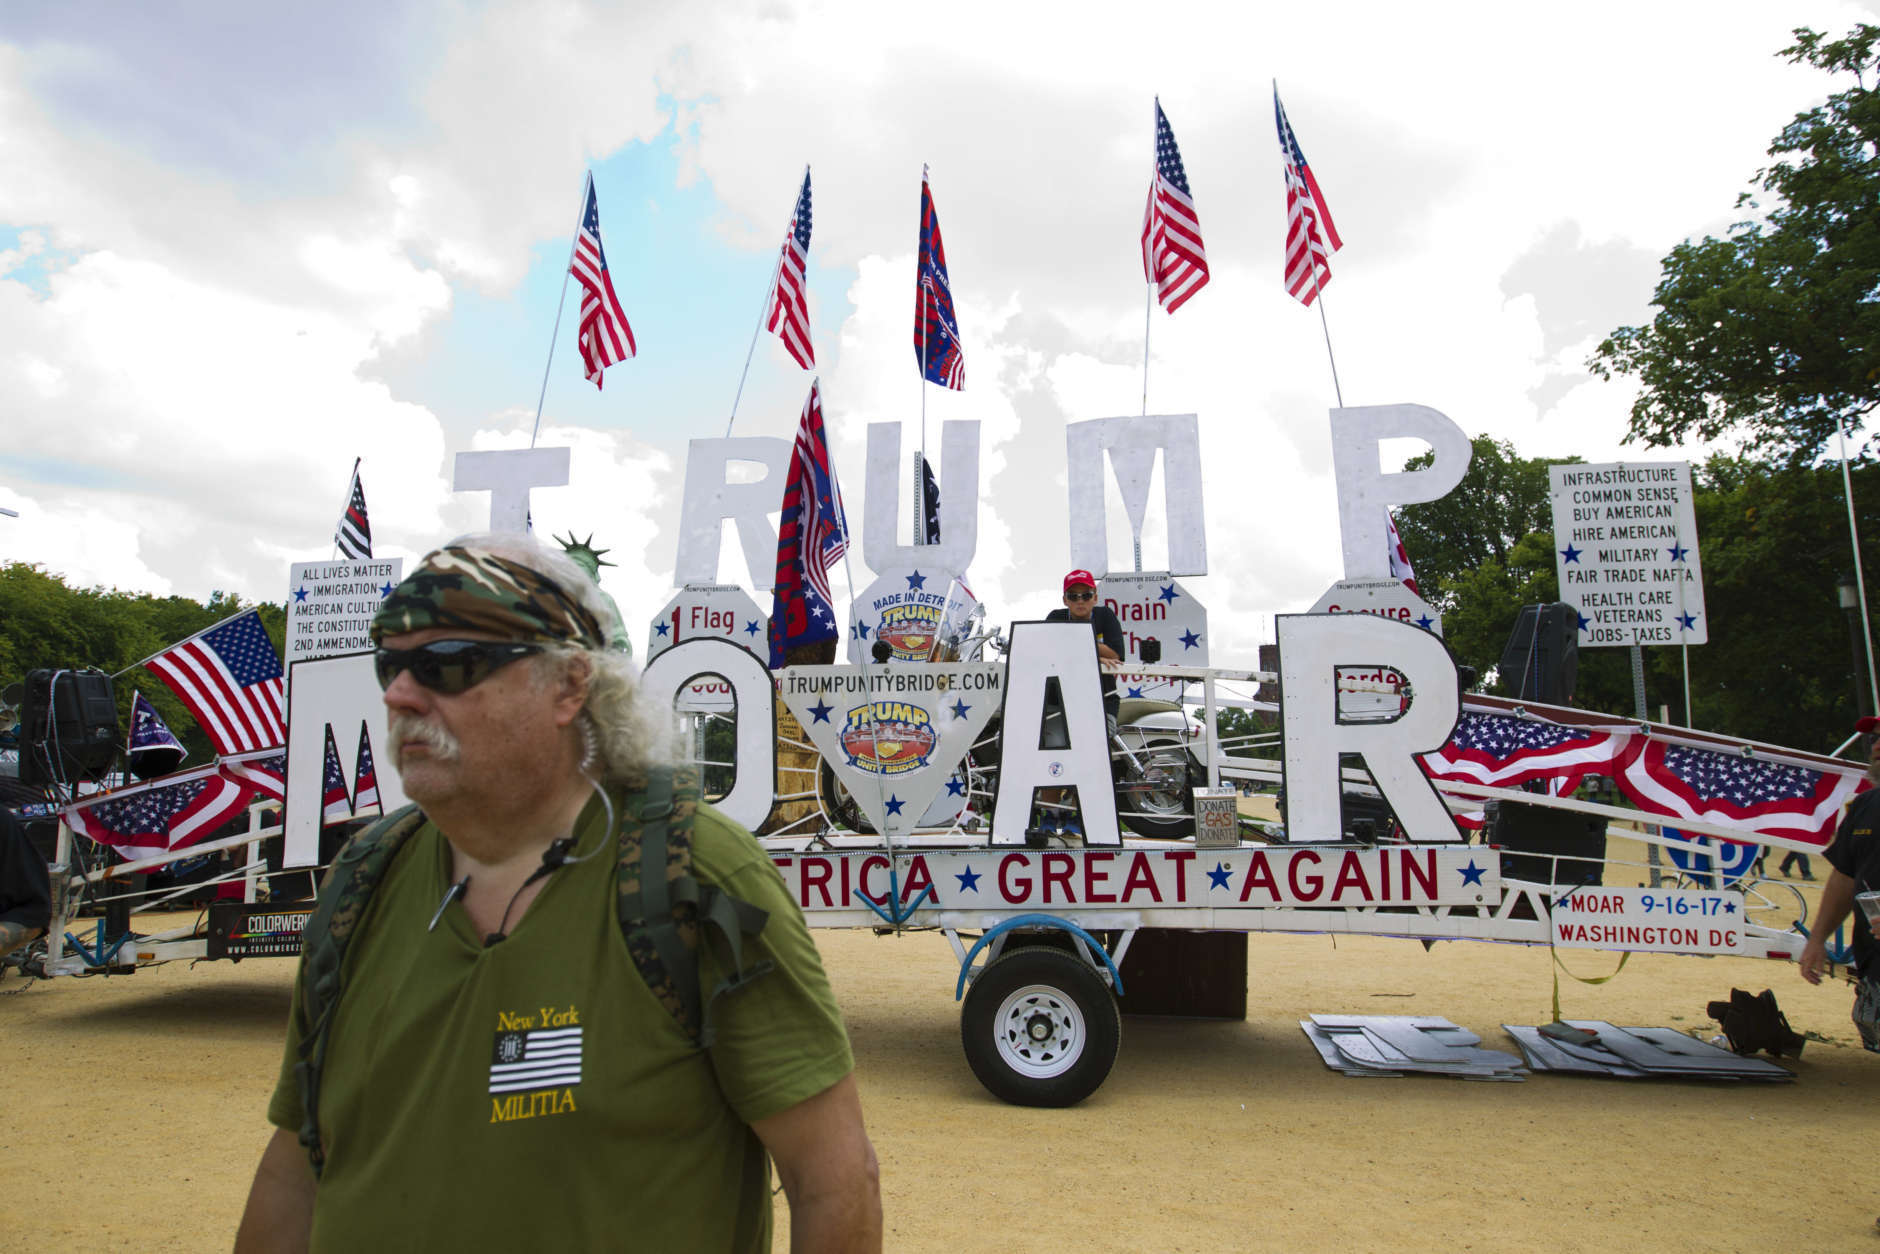 People gather on the National Mall in Washington, Saturday, Sept. 16, 2017, to attend a rally in support of President Donald Trump in what organizers are calling 'The Mother of All Rallies." ( AP Photo/Jose Luis Magana)